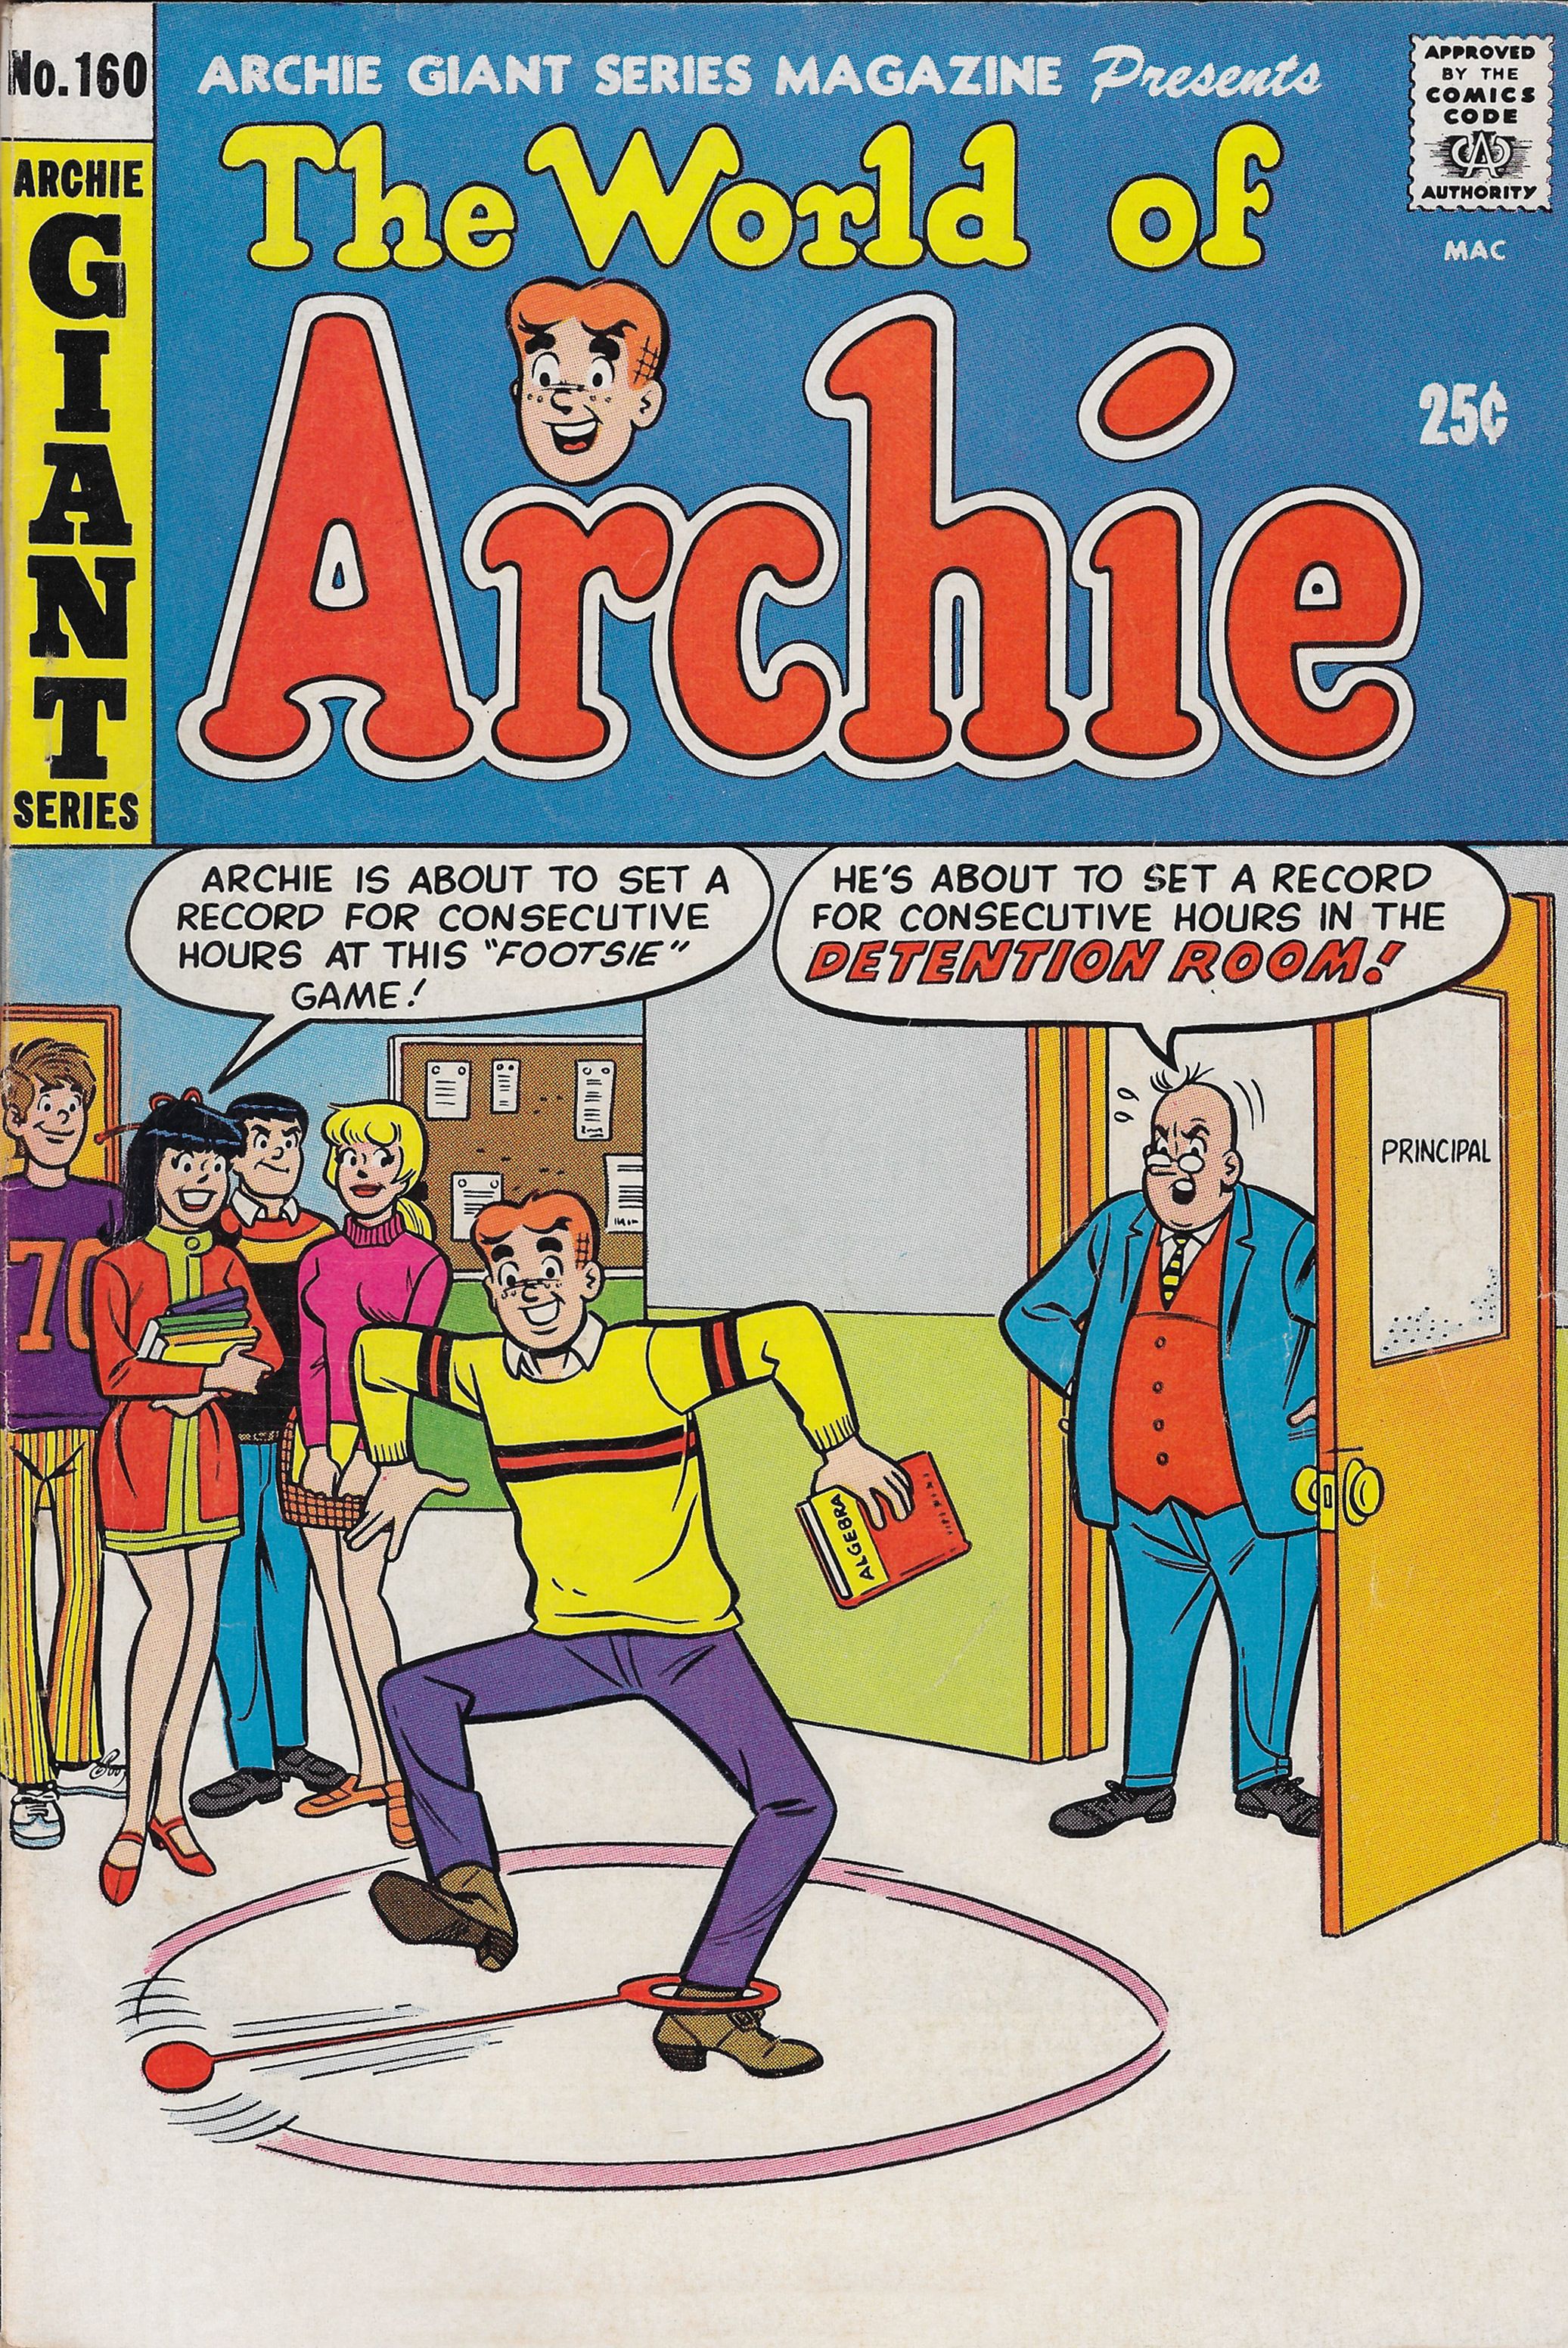 Read online Archie Giant Series Magazine comic -  Issue #160 - 1